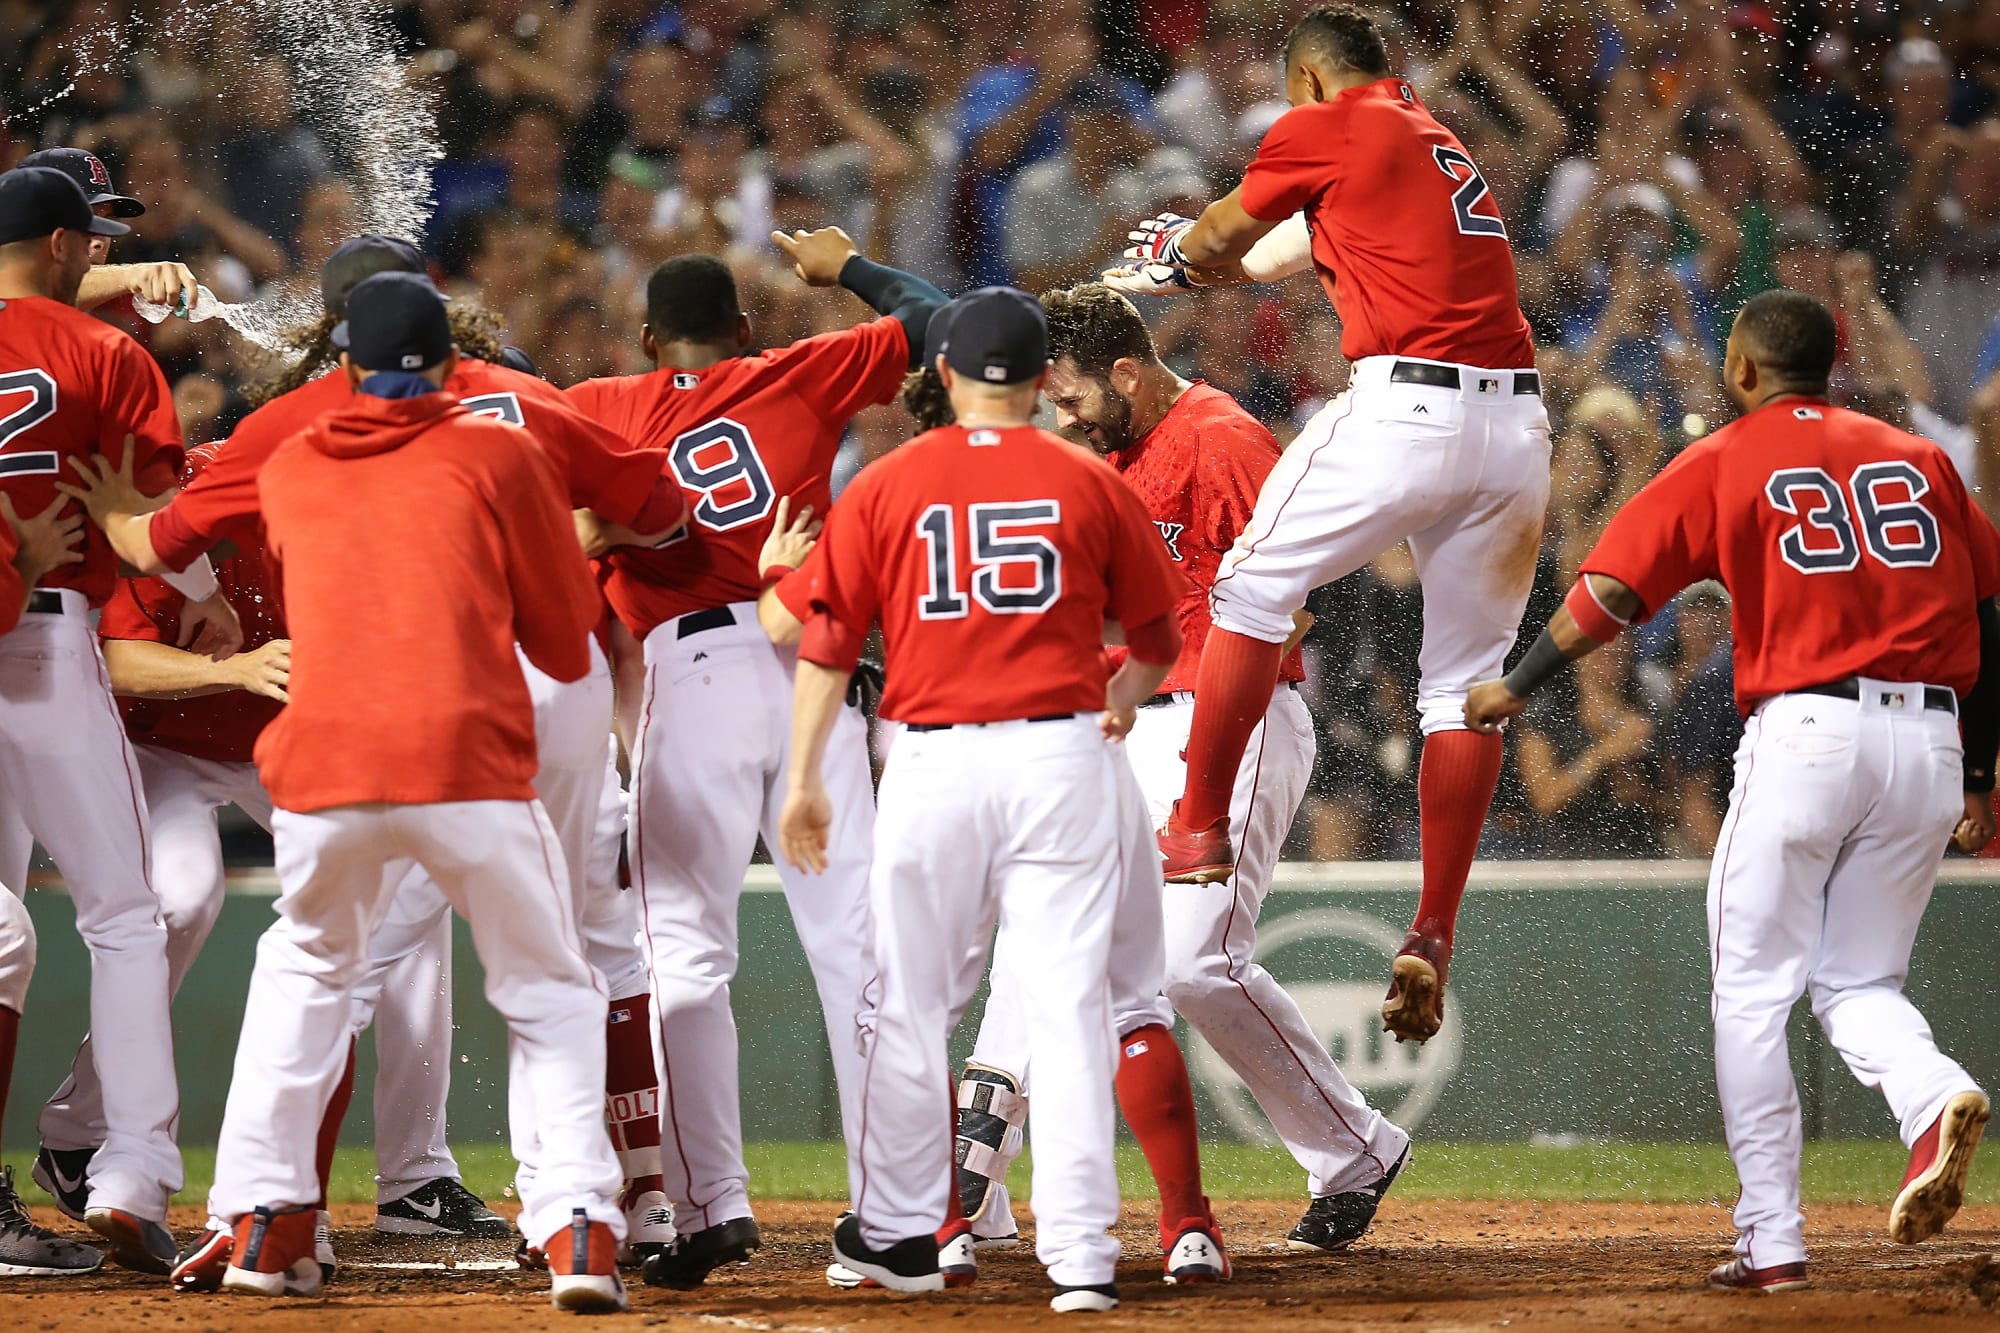 The Boston Red Sox can beat the Astros in a playoff series